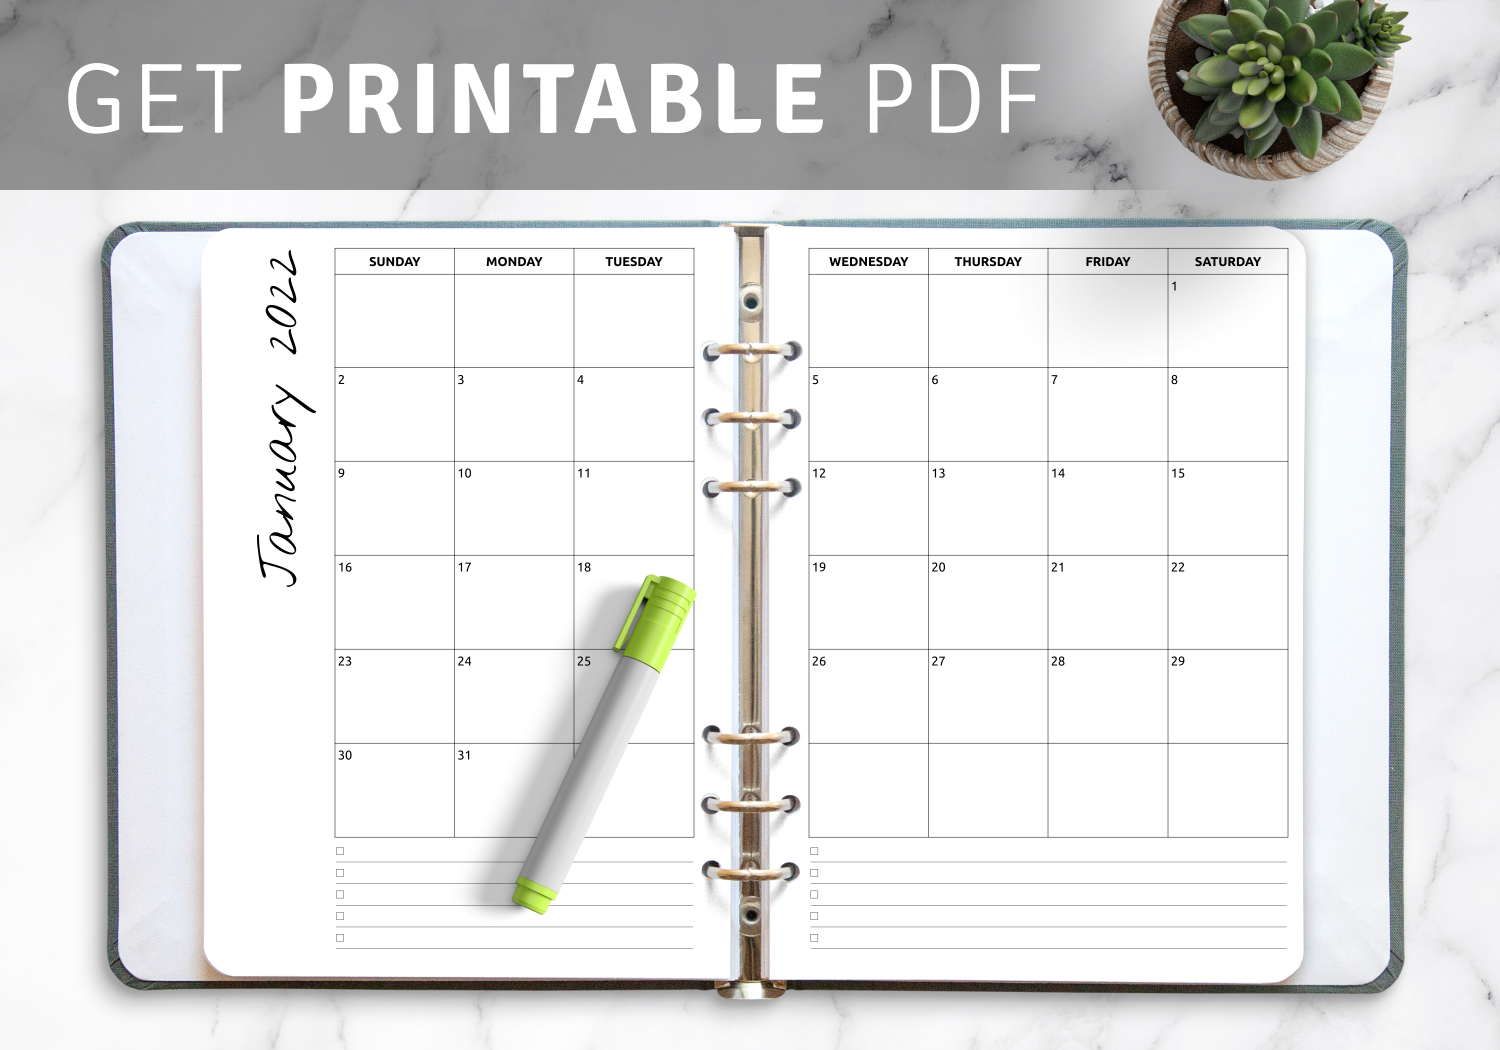 printable-july-calendar-2021-with-notes-portrait-editable-july-2021-calendar-with-holidays-and